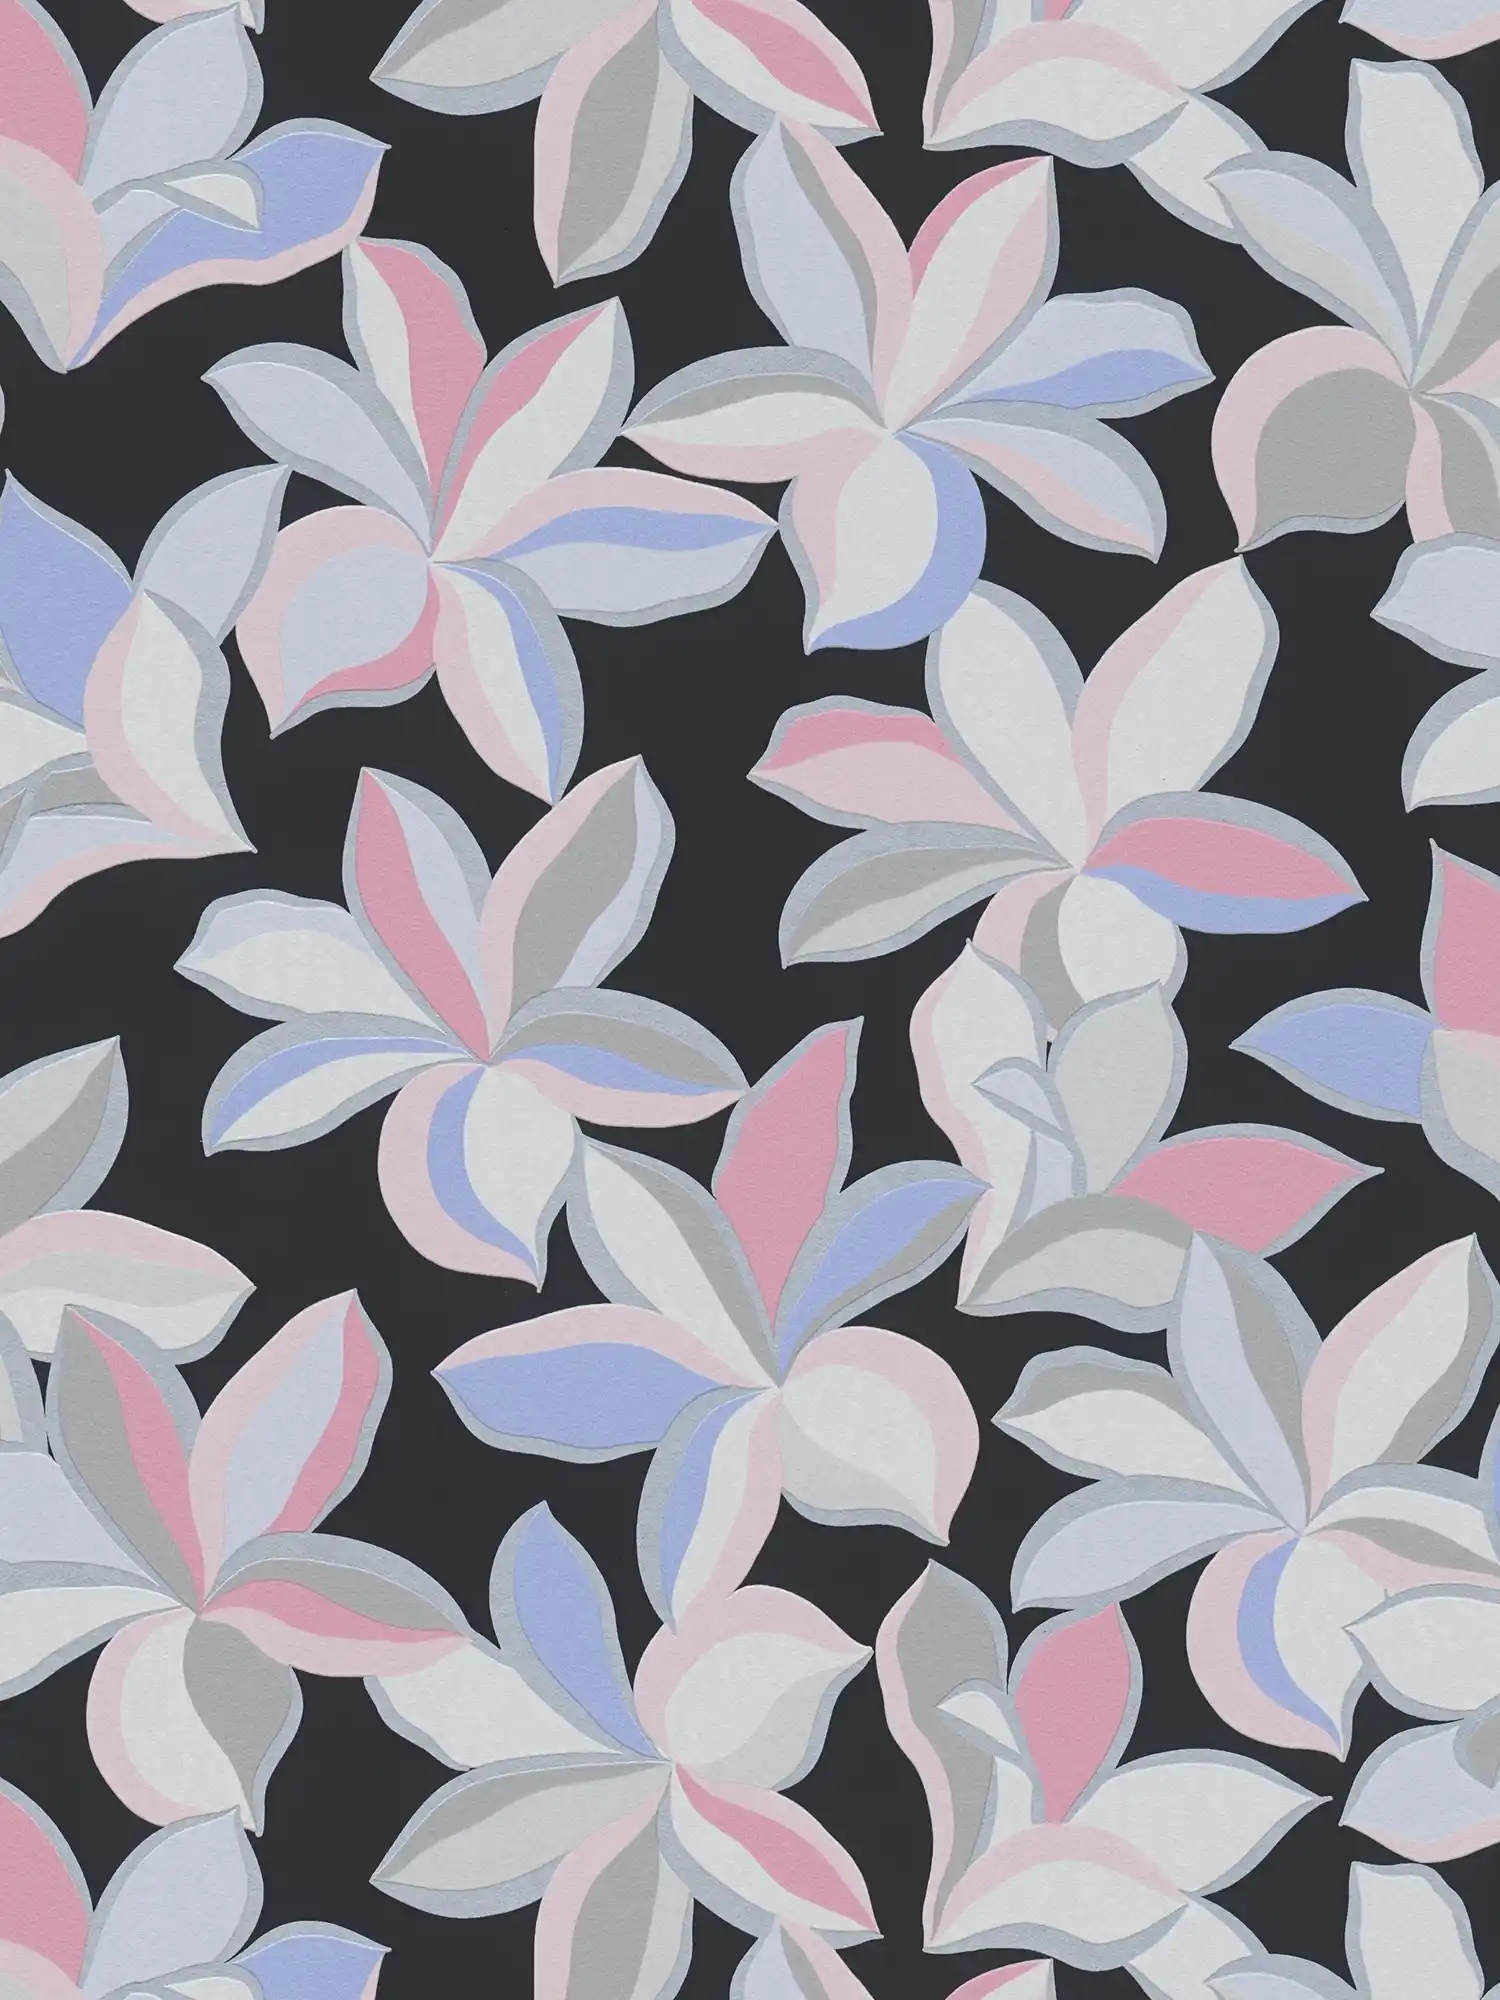 Floral pattern with glossy effect and fine texture - black, grey, pink
